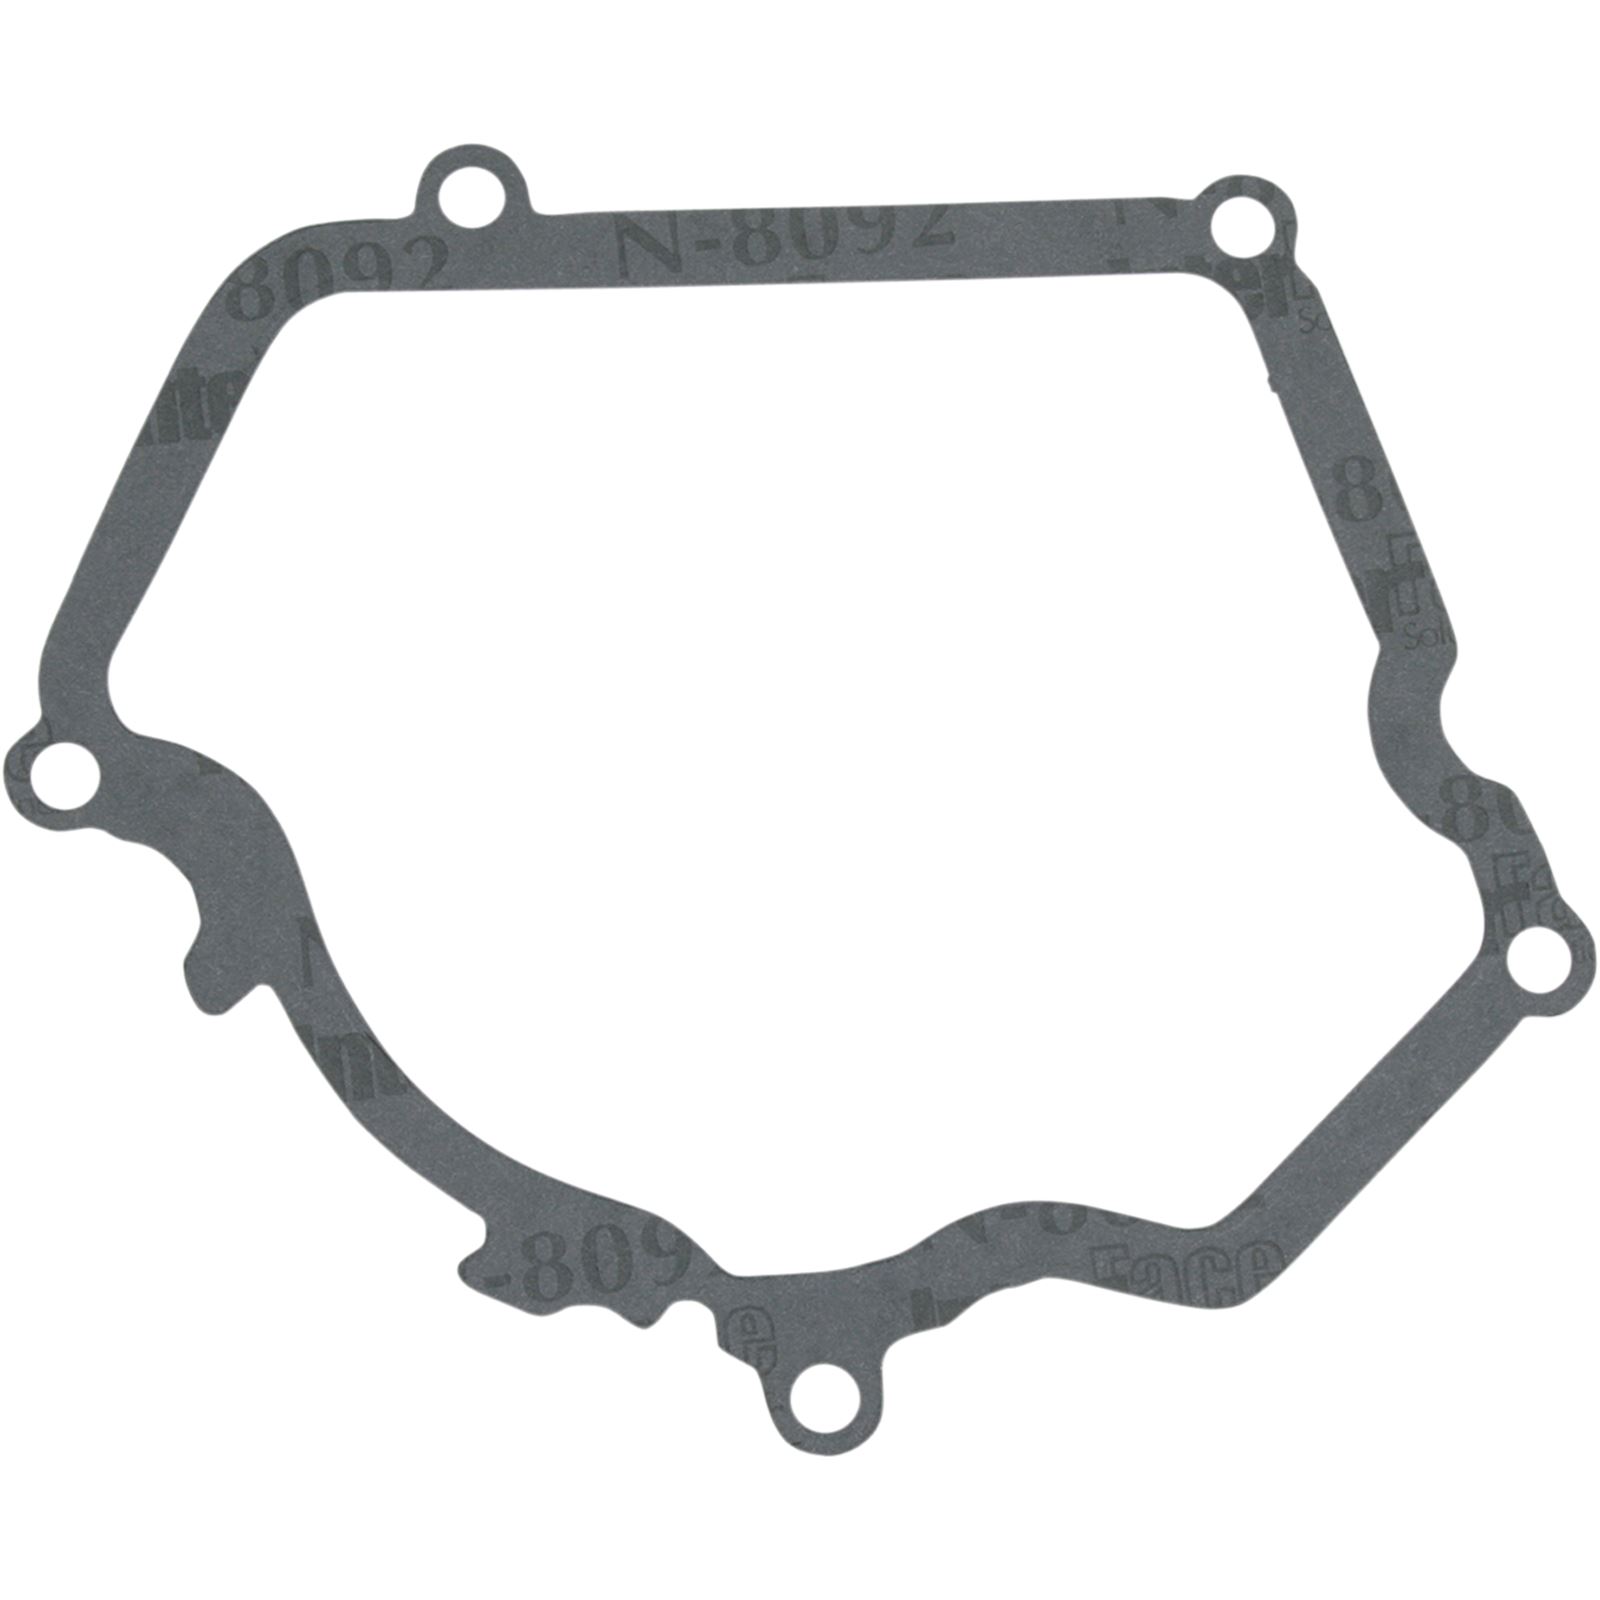 Moose Racing Ignition Cover Gasket YZ250